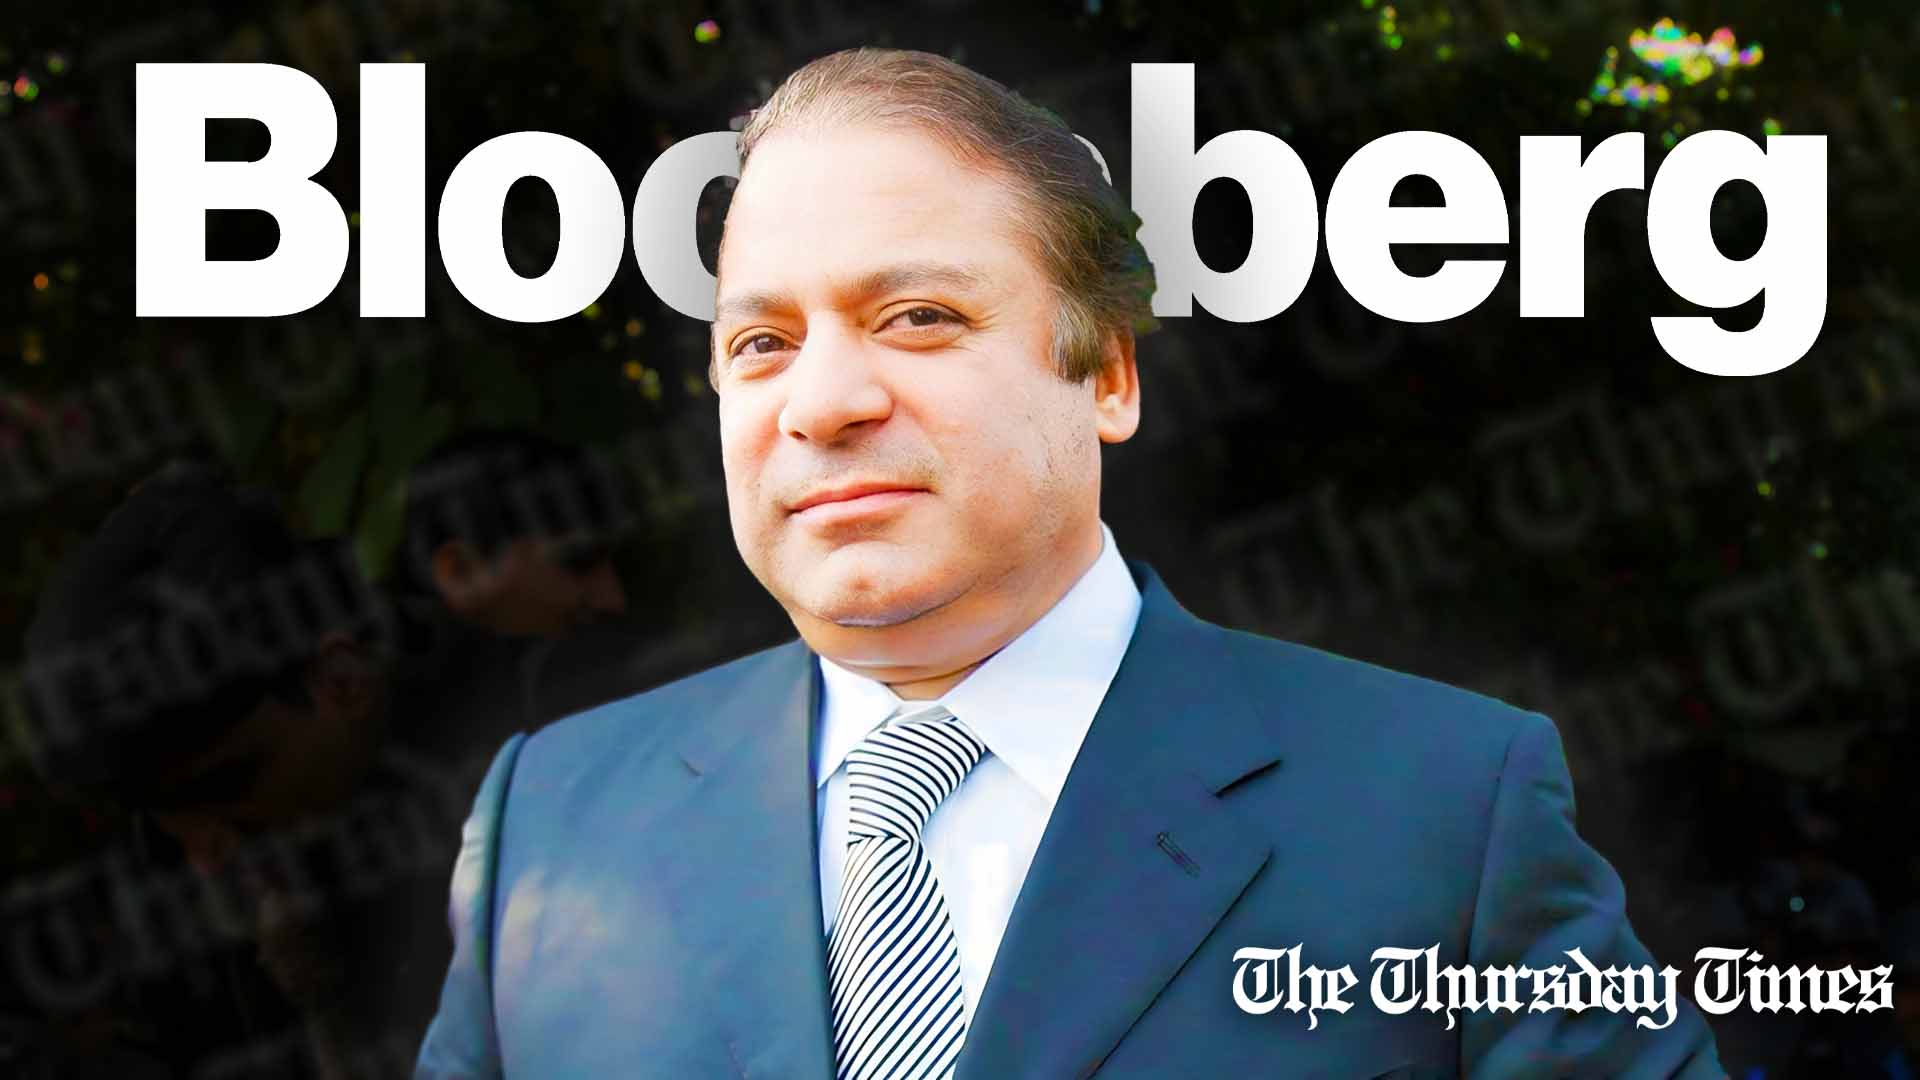 A file photo is shown of PML(N) supremo Nawaz Sharif at Islamabad on December 6, 2007. — FILE/THE THURSDAY TIMES